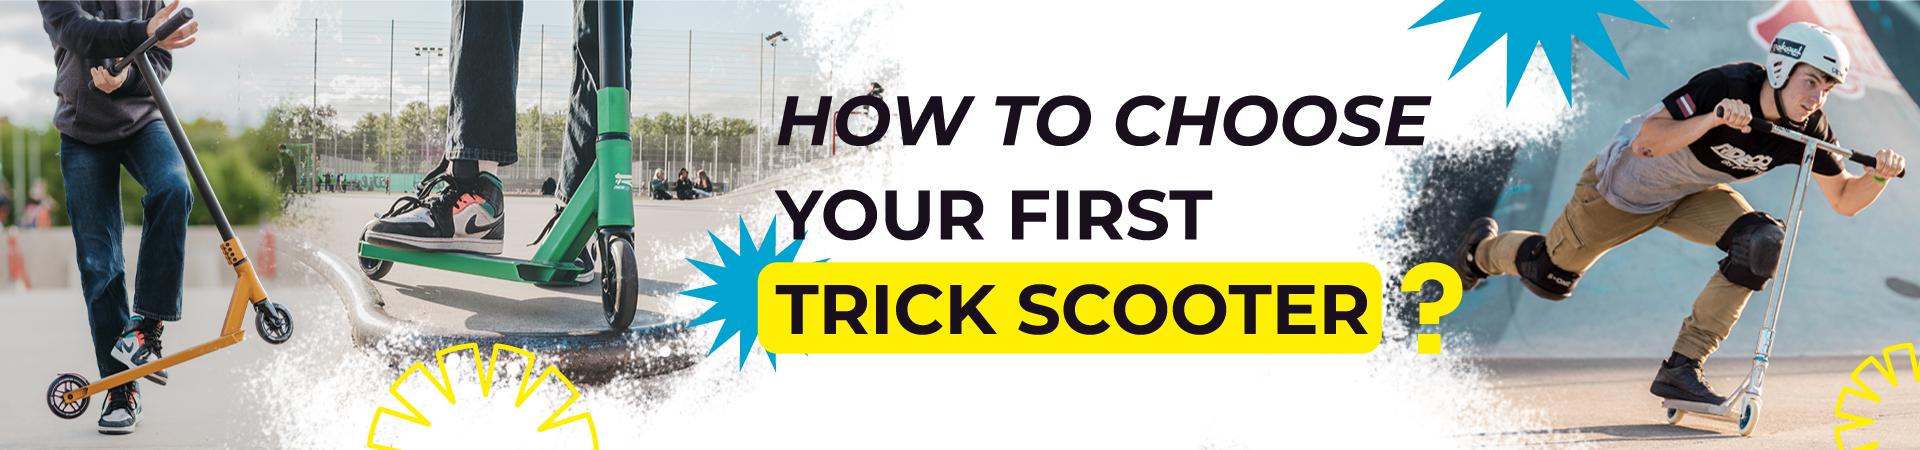 How to choose your first trick scooter?